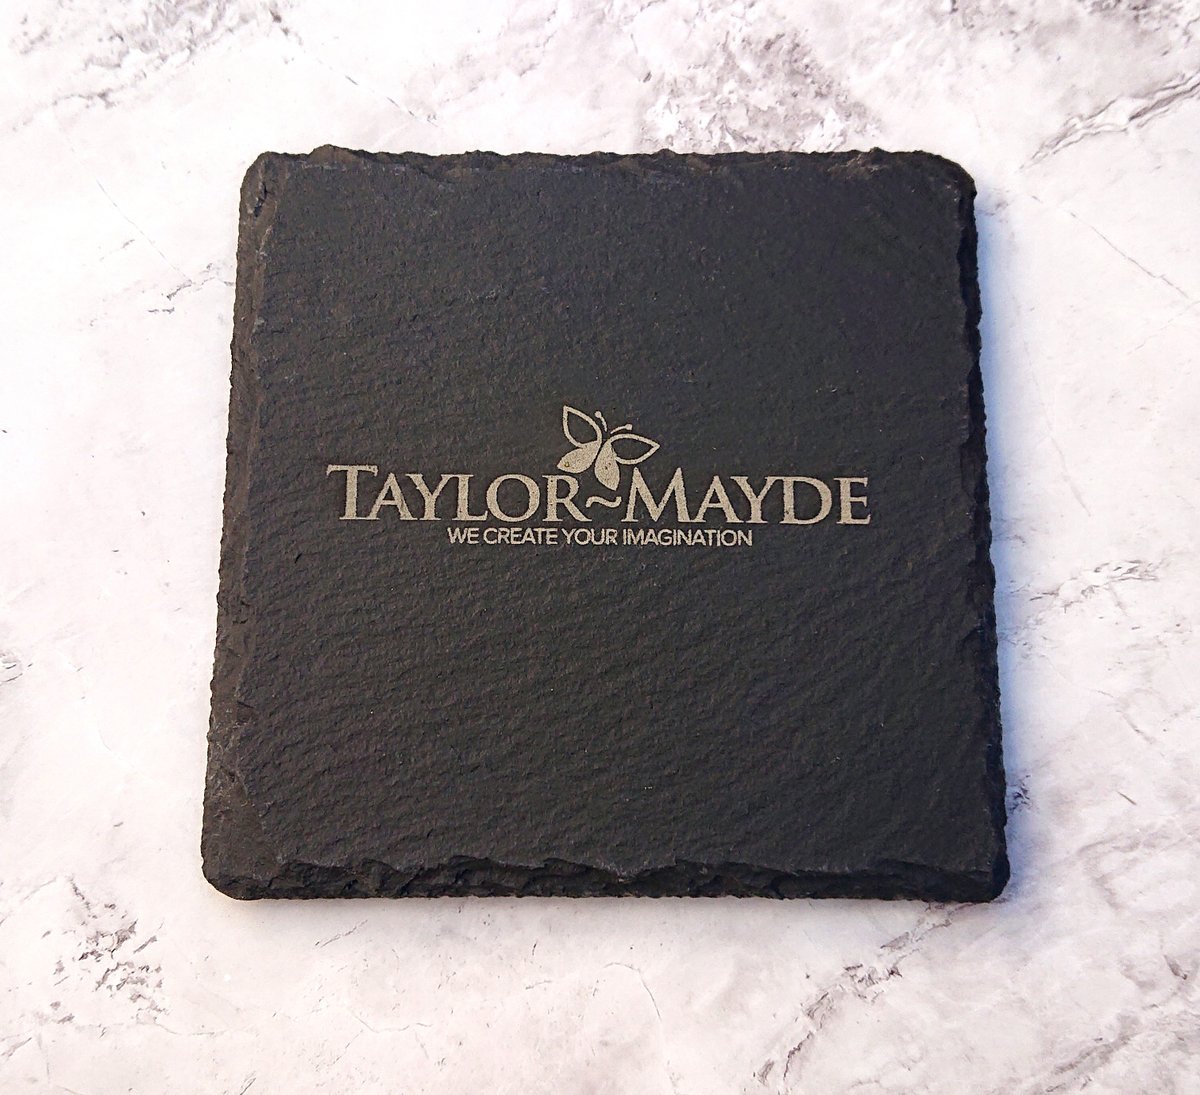 Most breweries & distilleries have giftboxes but is a bottle and maybe a glass all you include in it - nothing snazzy to sit that glass on? 

We can create beautiful branded slate coasters for you like this one surefyre.com/slate

#beer #gin #sbs #hospitality #mhhsbd